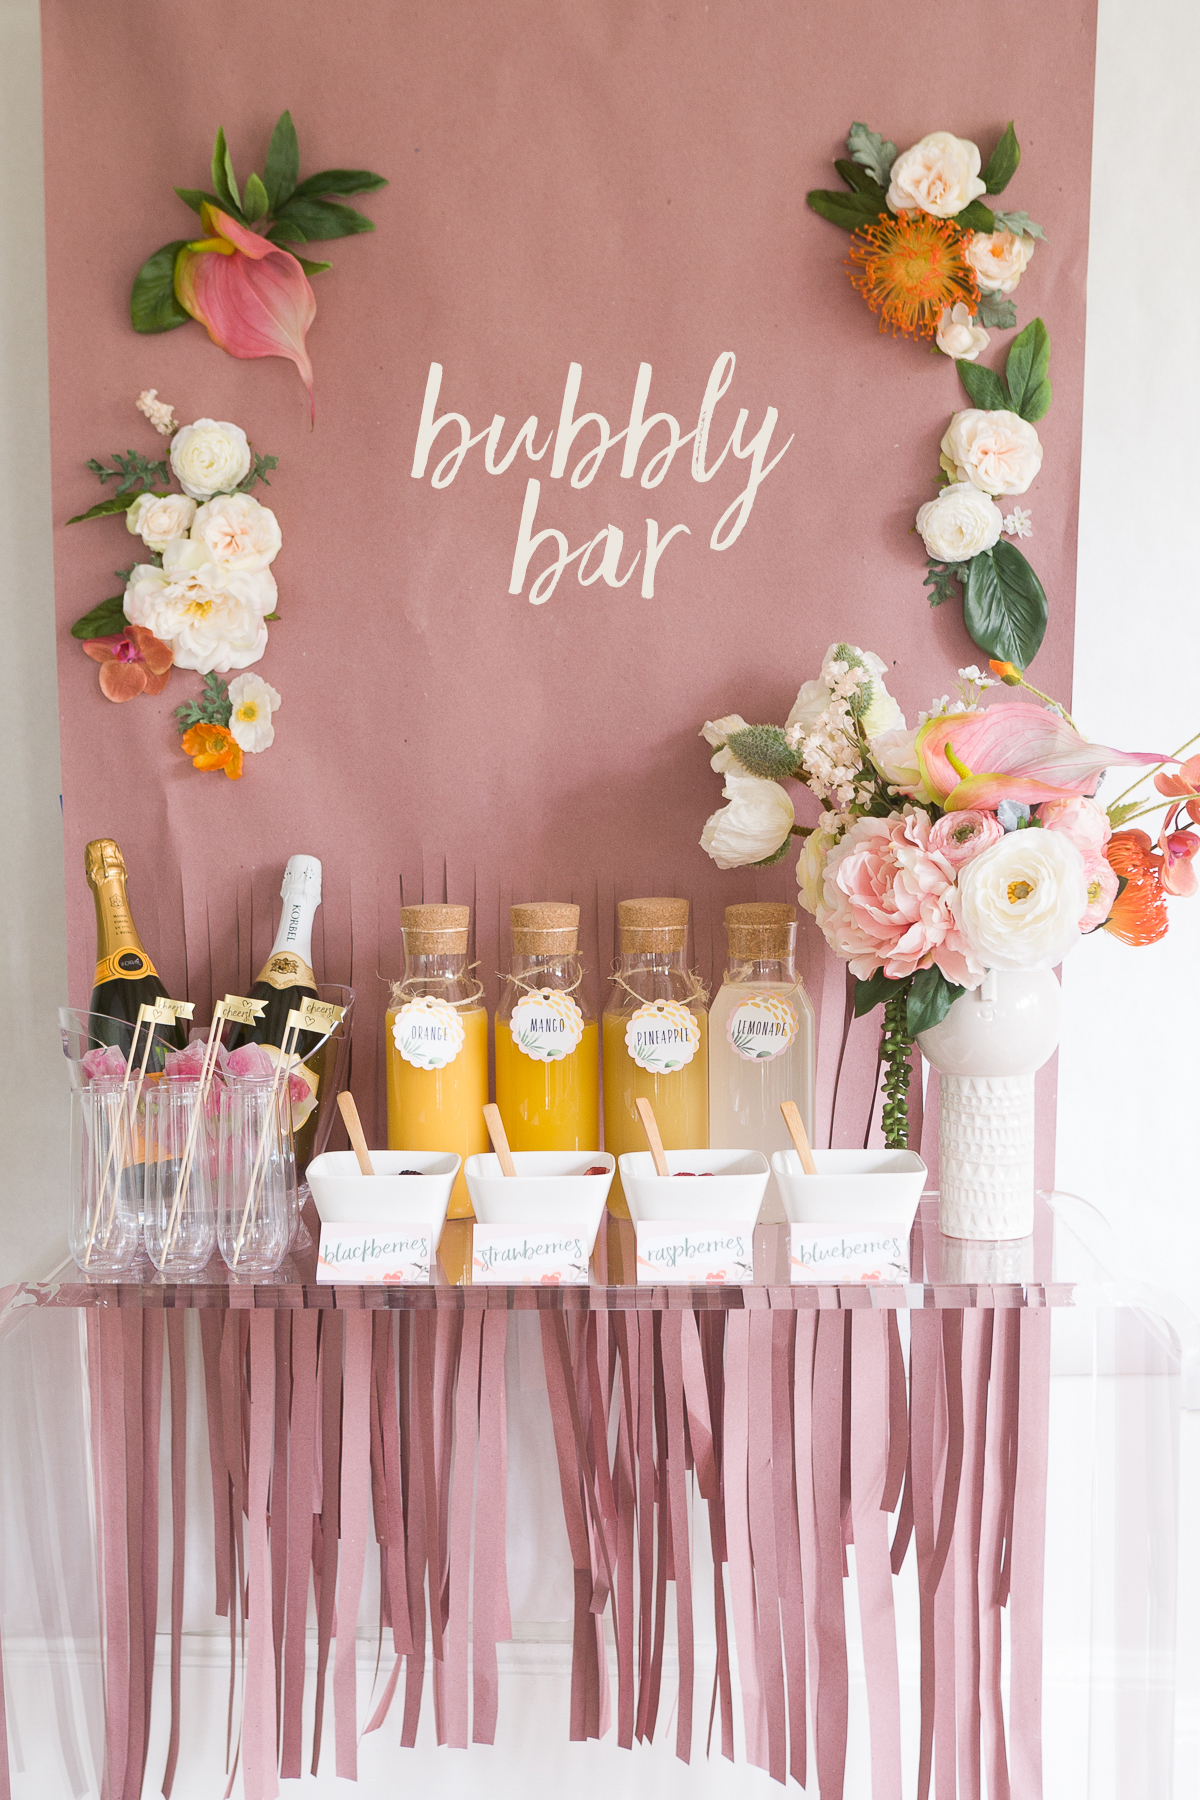 What Decorations Do You Need For A Bridal Shower